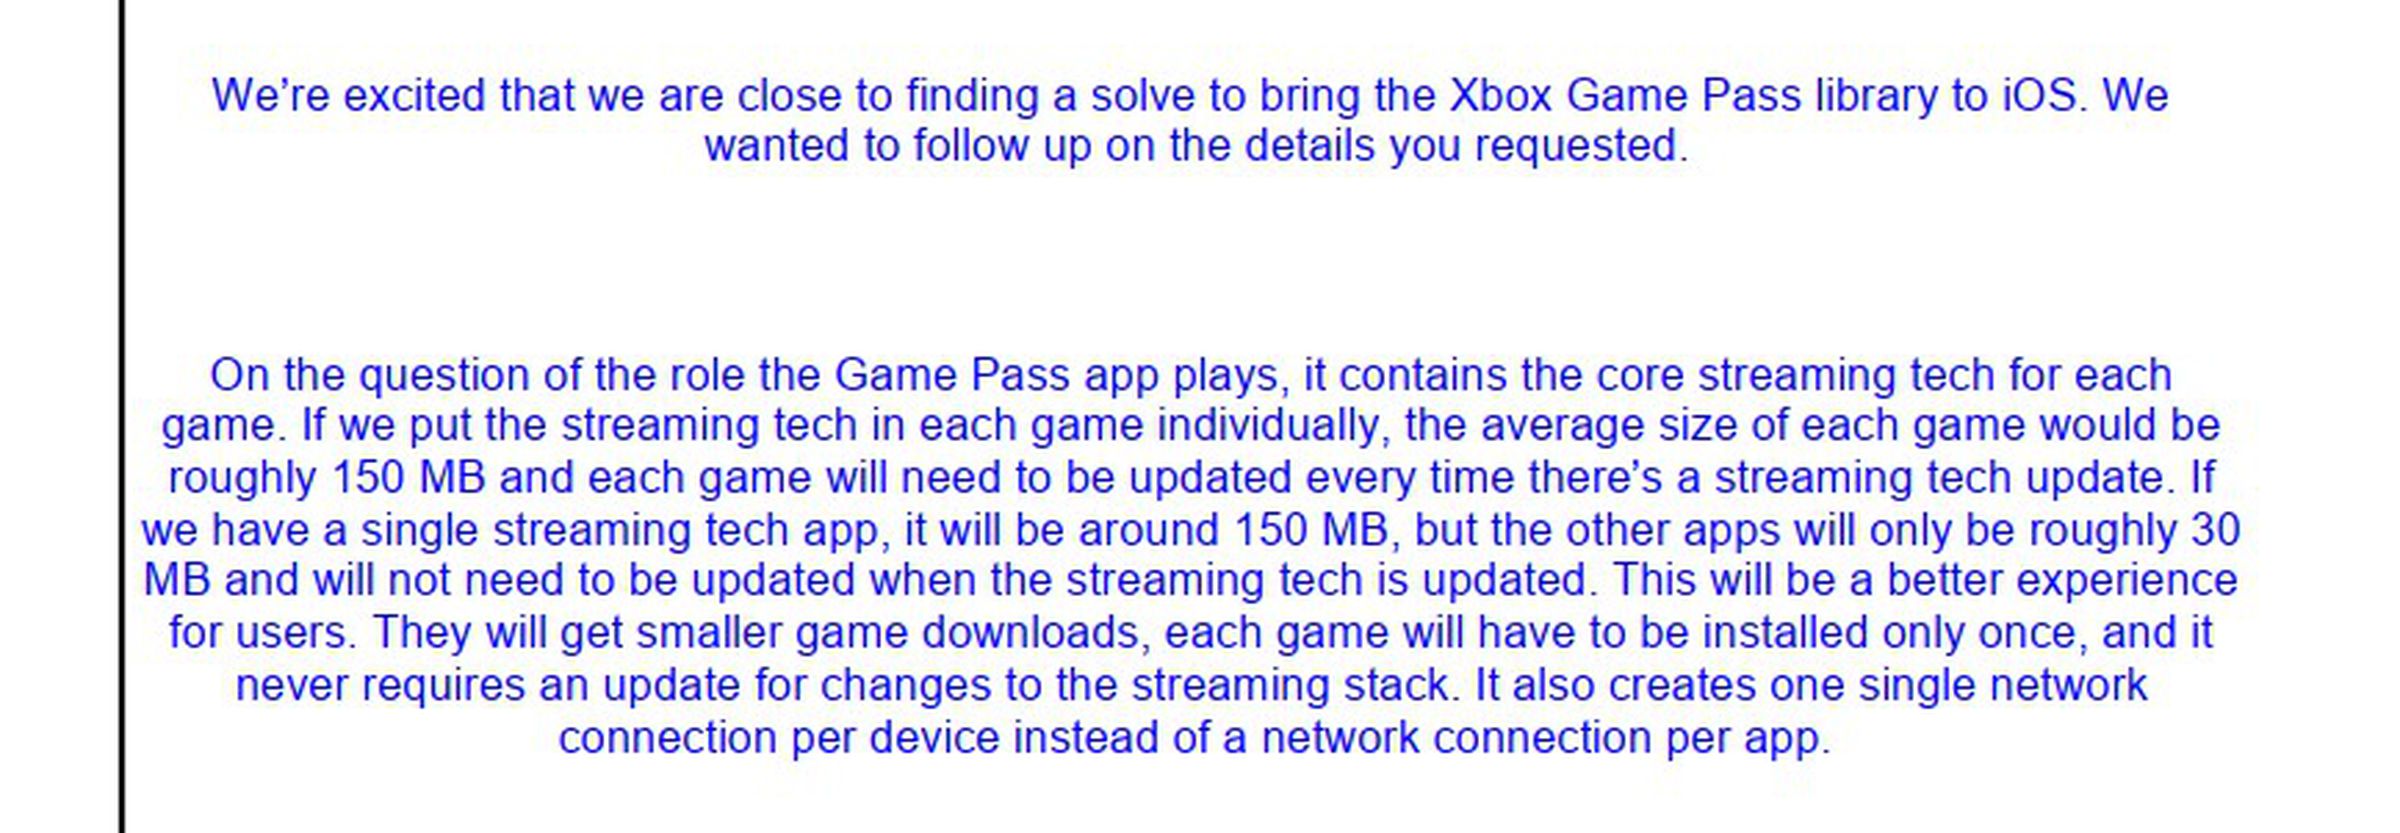 Wright explains that Microsoft is “close to finding a solve” to bring Xbox games to iOS as App Store apps.